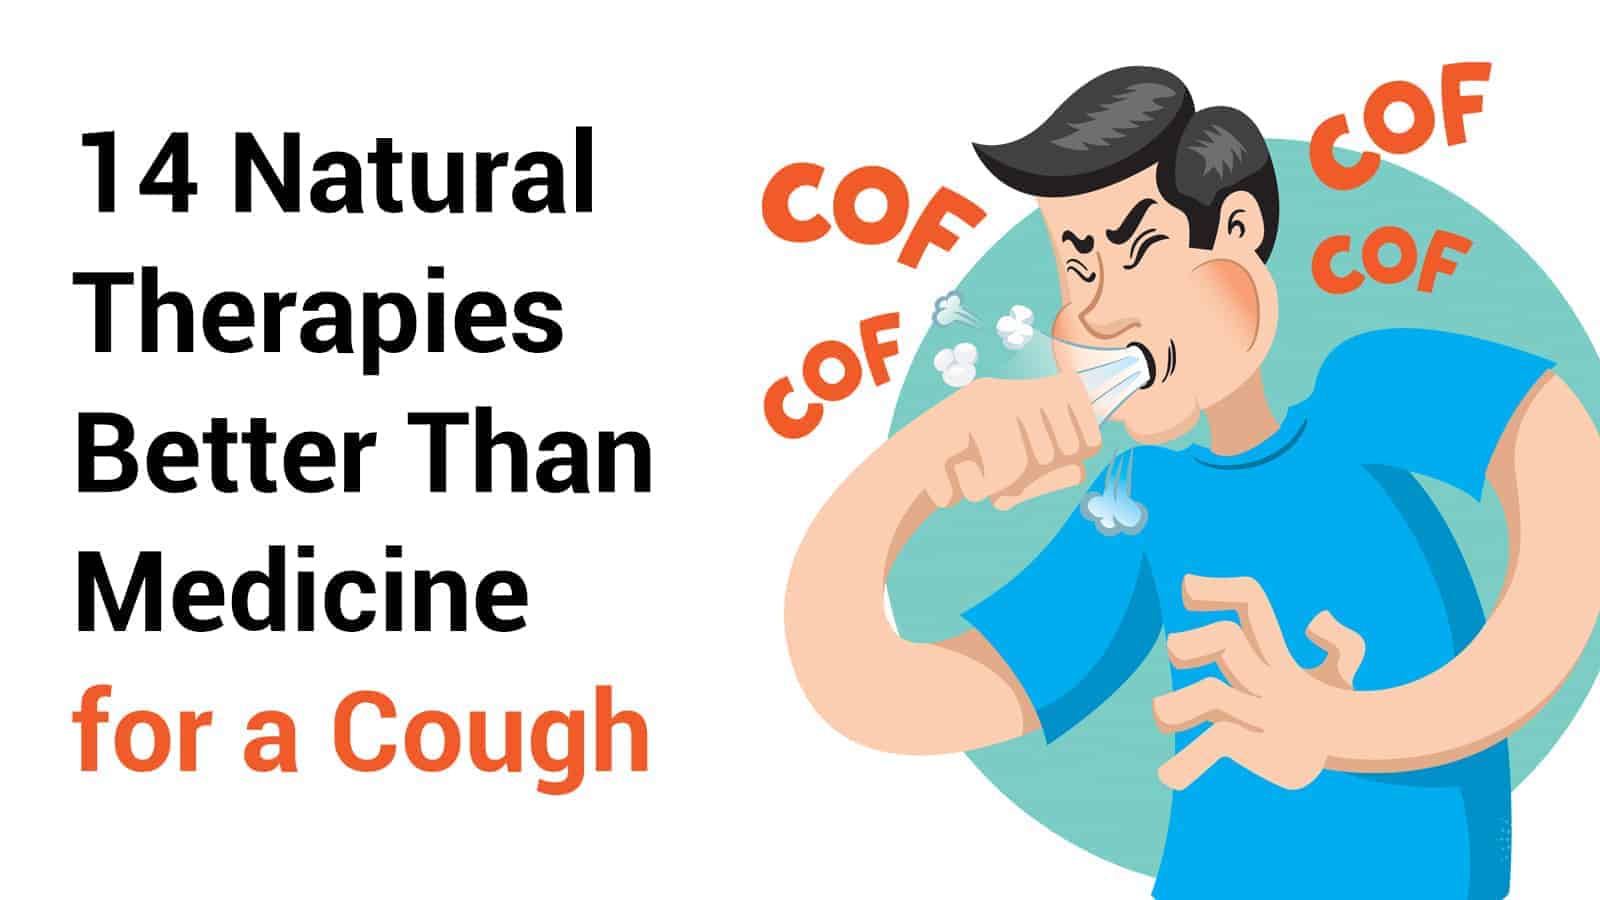 14 Natural Therapies Better Than Medicine for a Cough